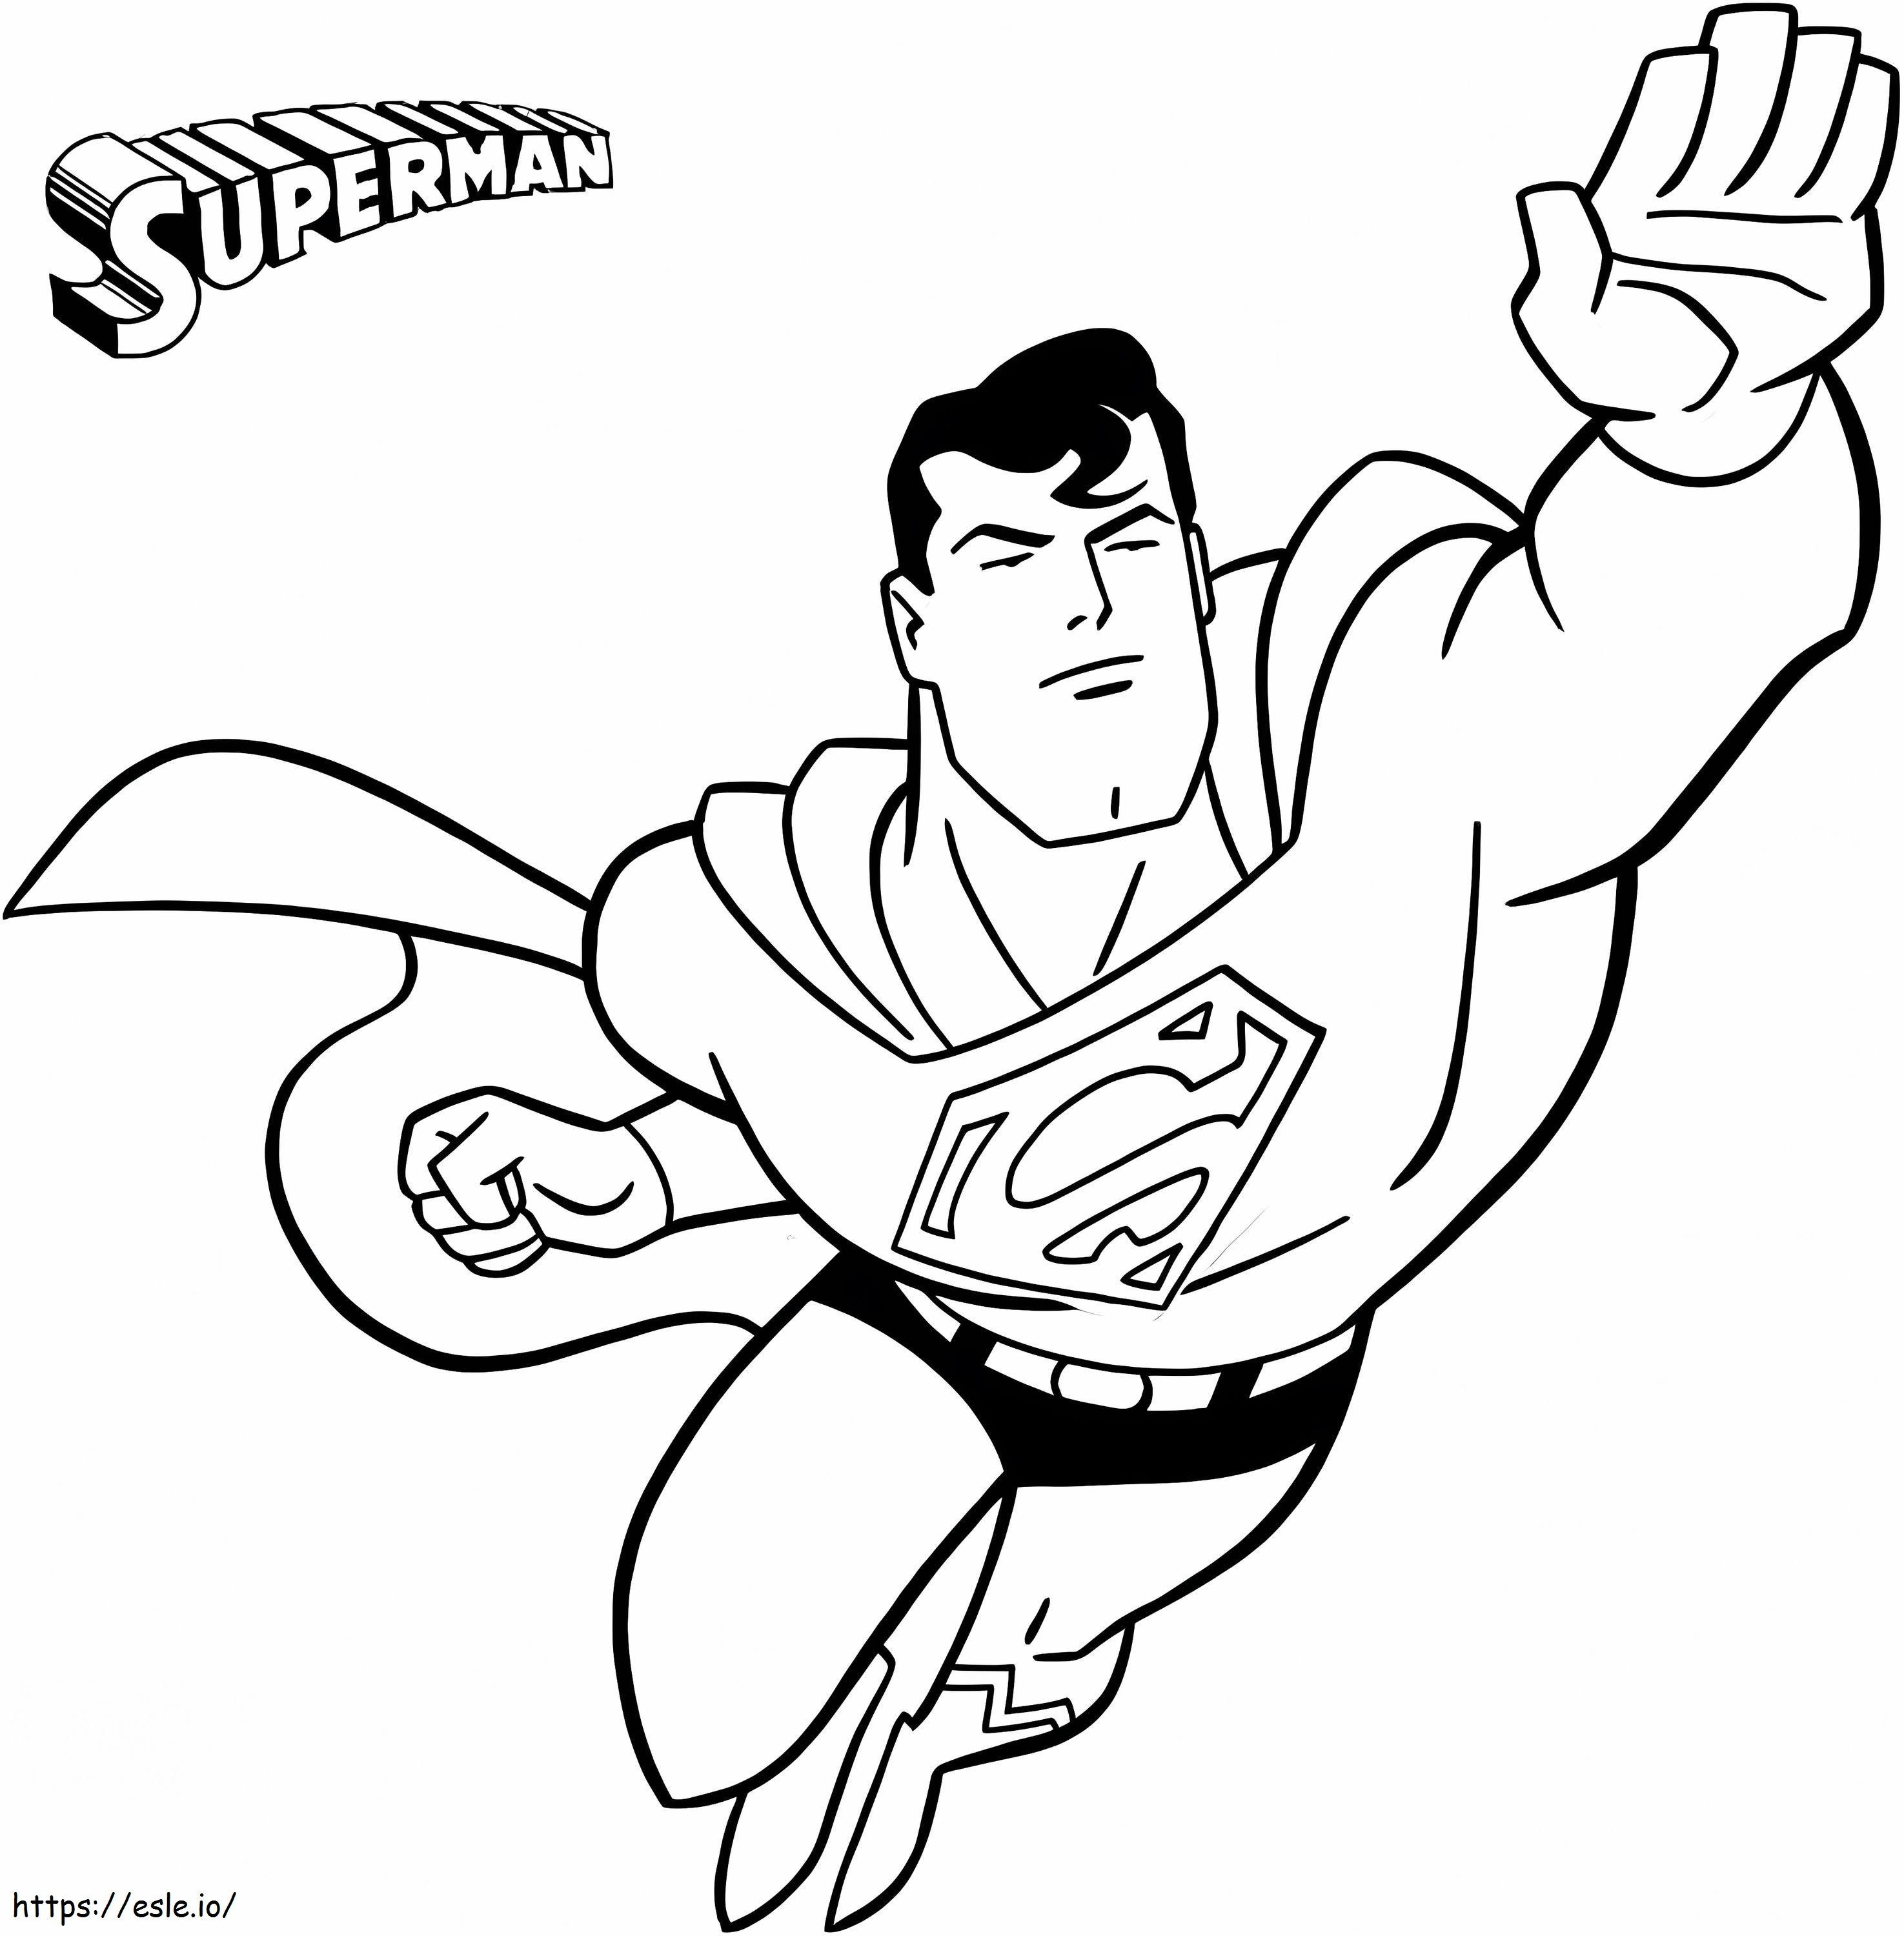 Superman Flying coloring page